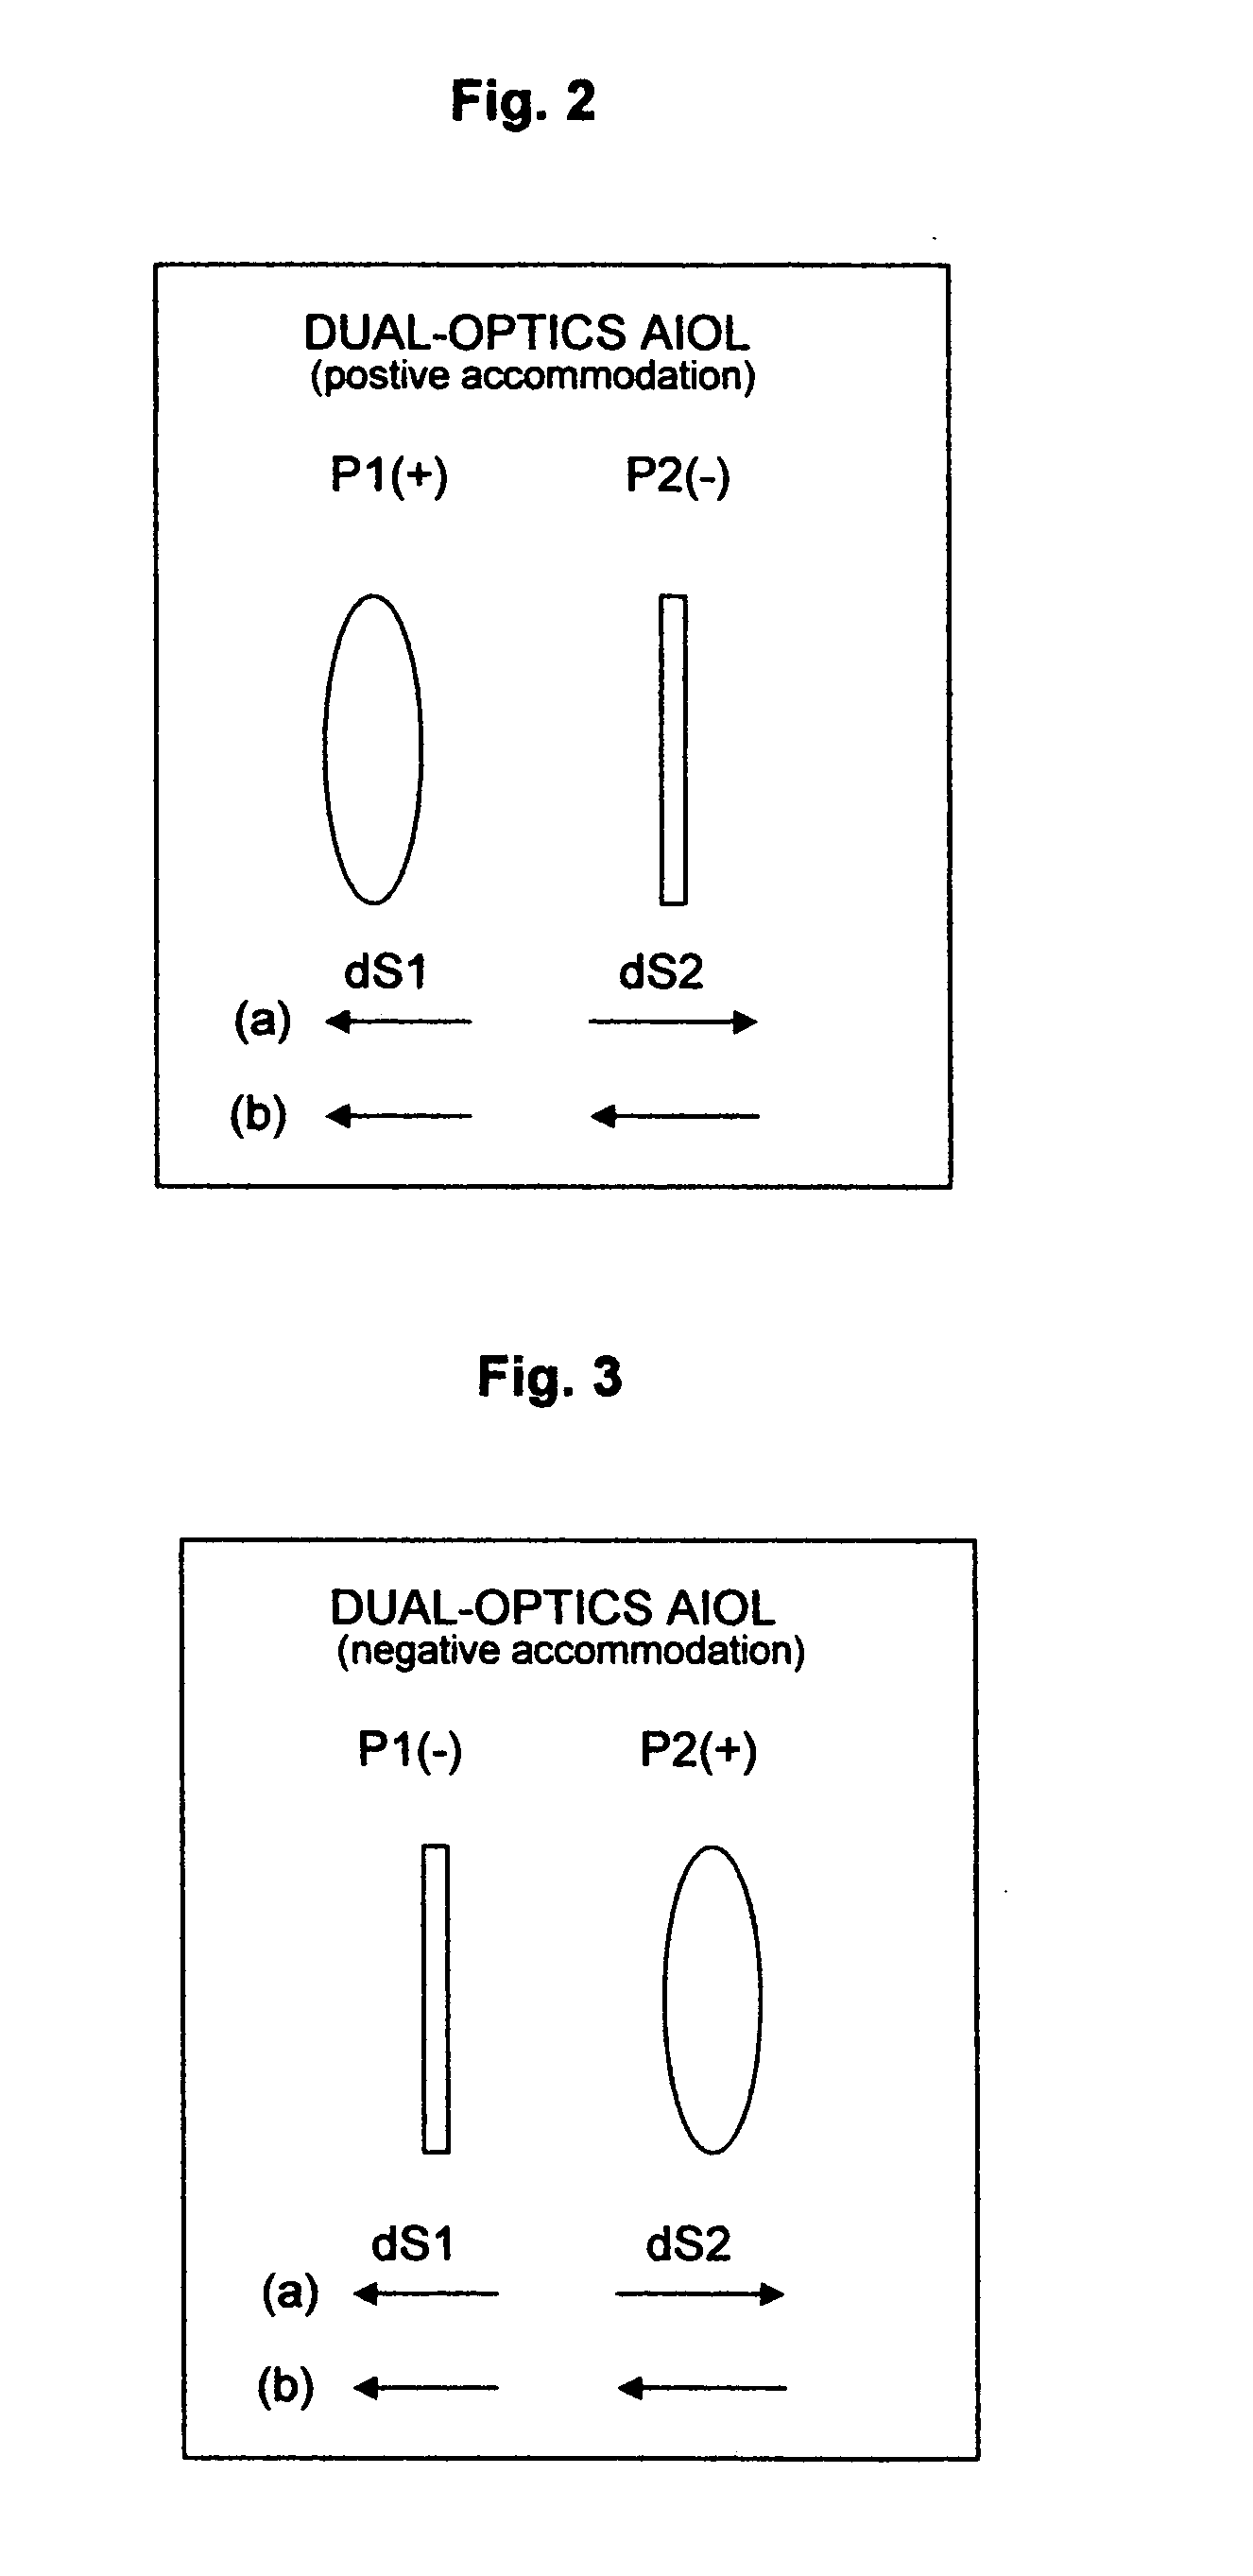 Method and device for vision correction via dual-optics accommodating intraocular lens